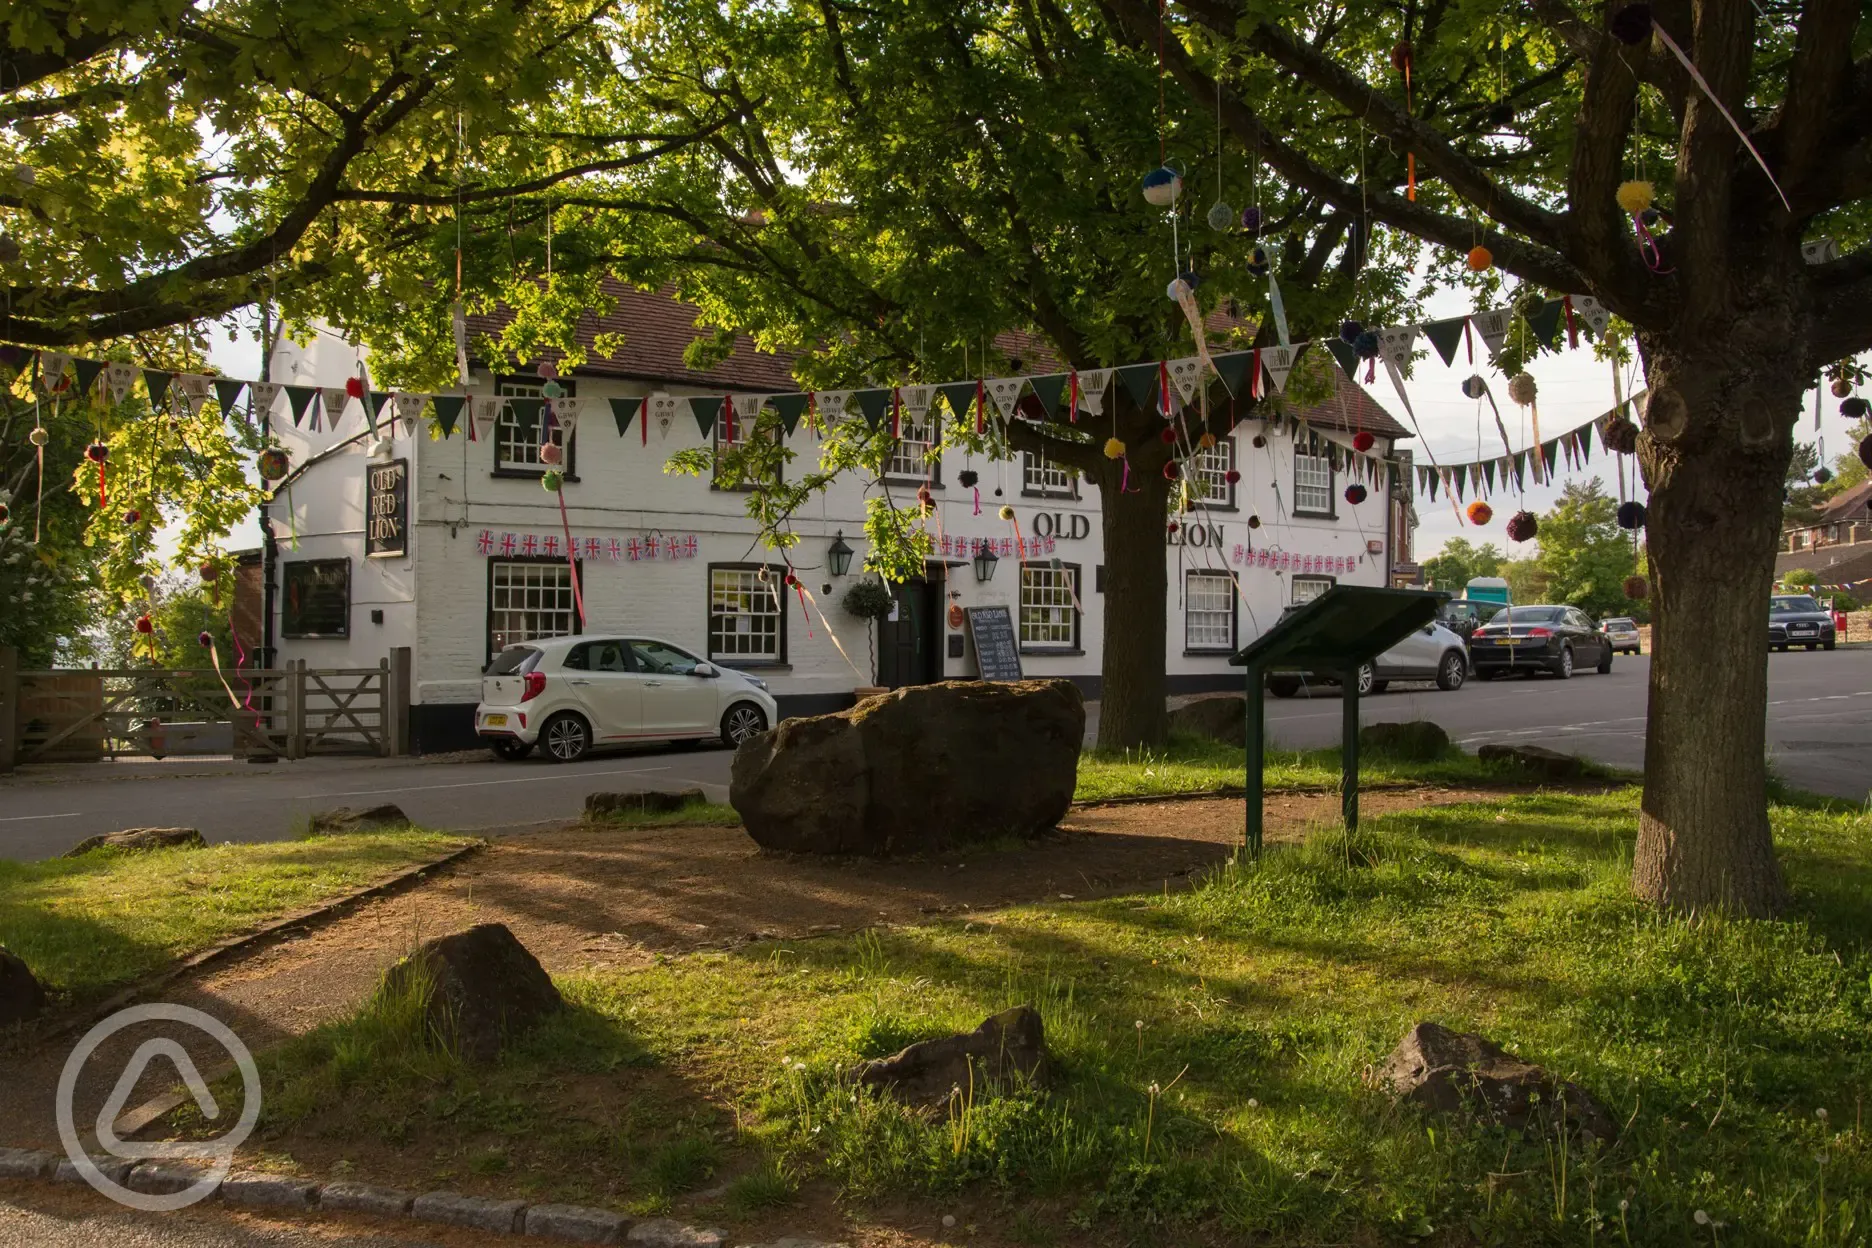 The Old Red Lion in nearby Great Brickhill